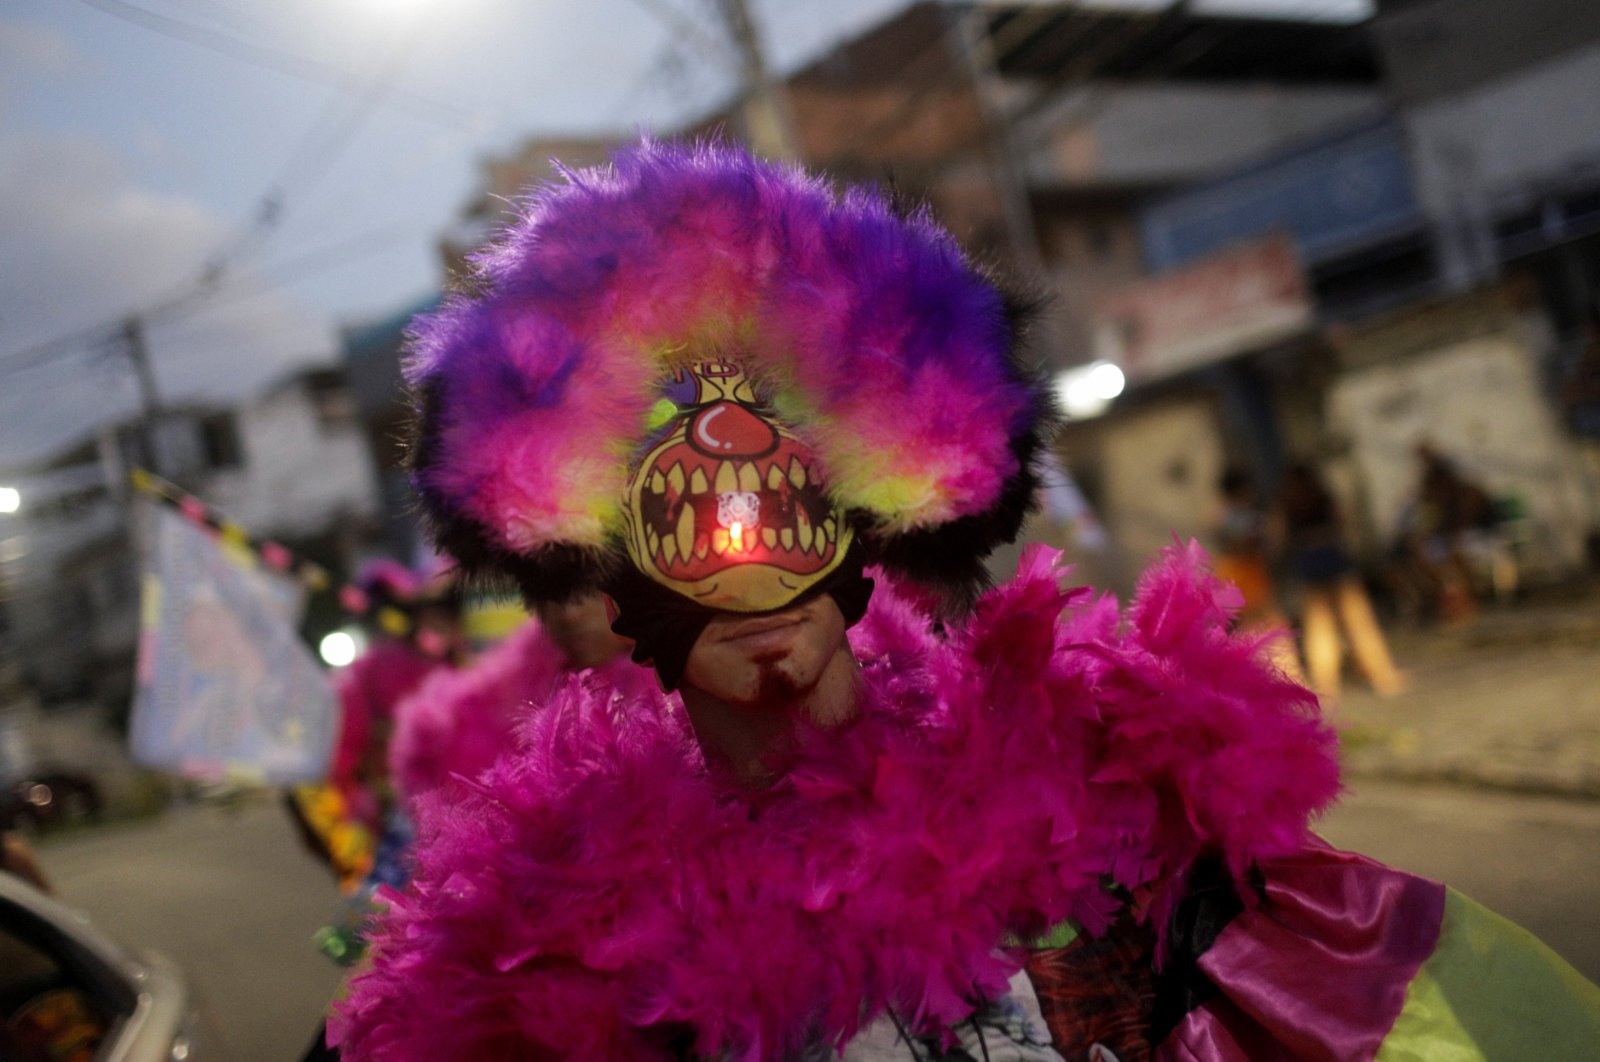 "Bate-bola" (slam the ball) revelers perform during the traditional carnival festivity in a suburb, despite Carnival celebrations being postponed to April due to the coronavirus outbreak in Rio de Janeiro, Brazil, Feb. 25, 2022. (Reuters Photo)